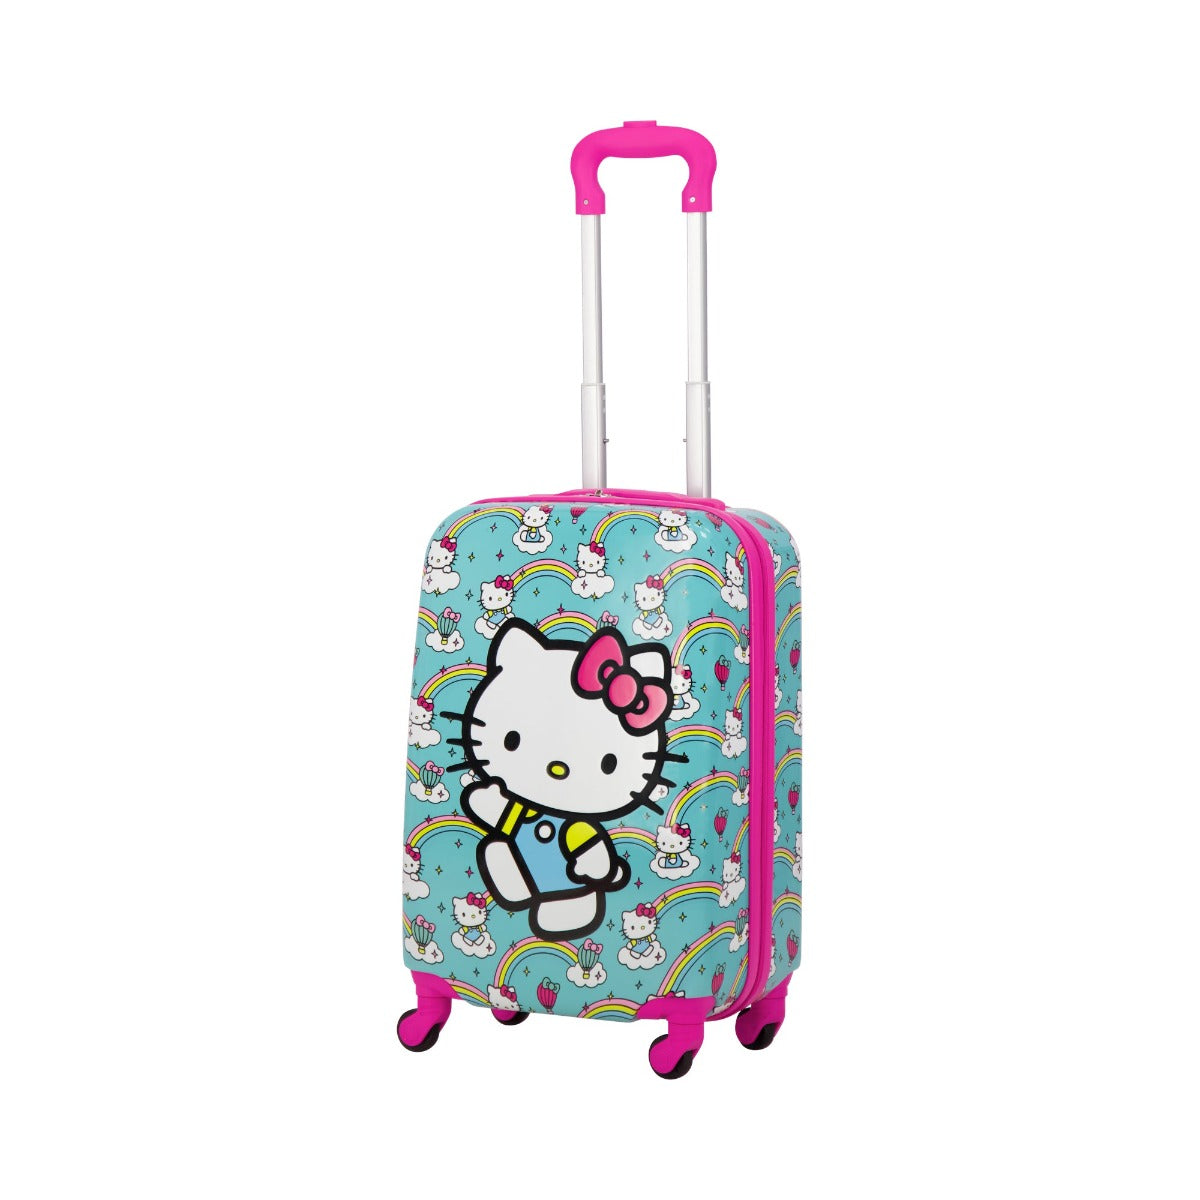 Hello Kitty Ful Rainbows 21" carry-on rolling luggage for kids